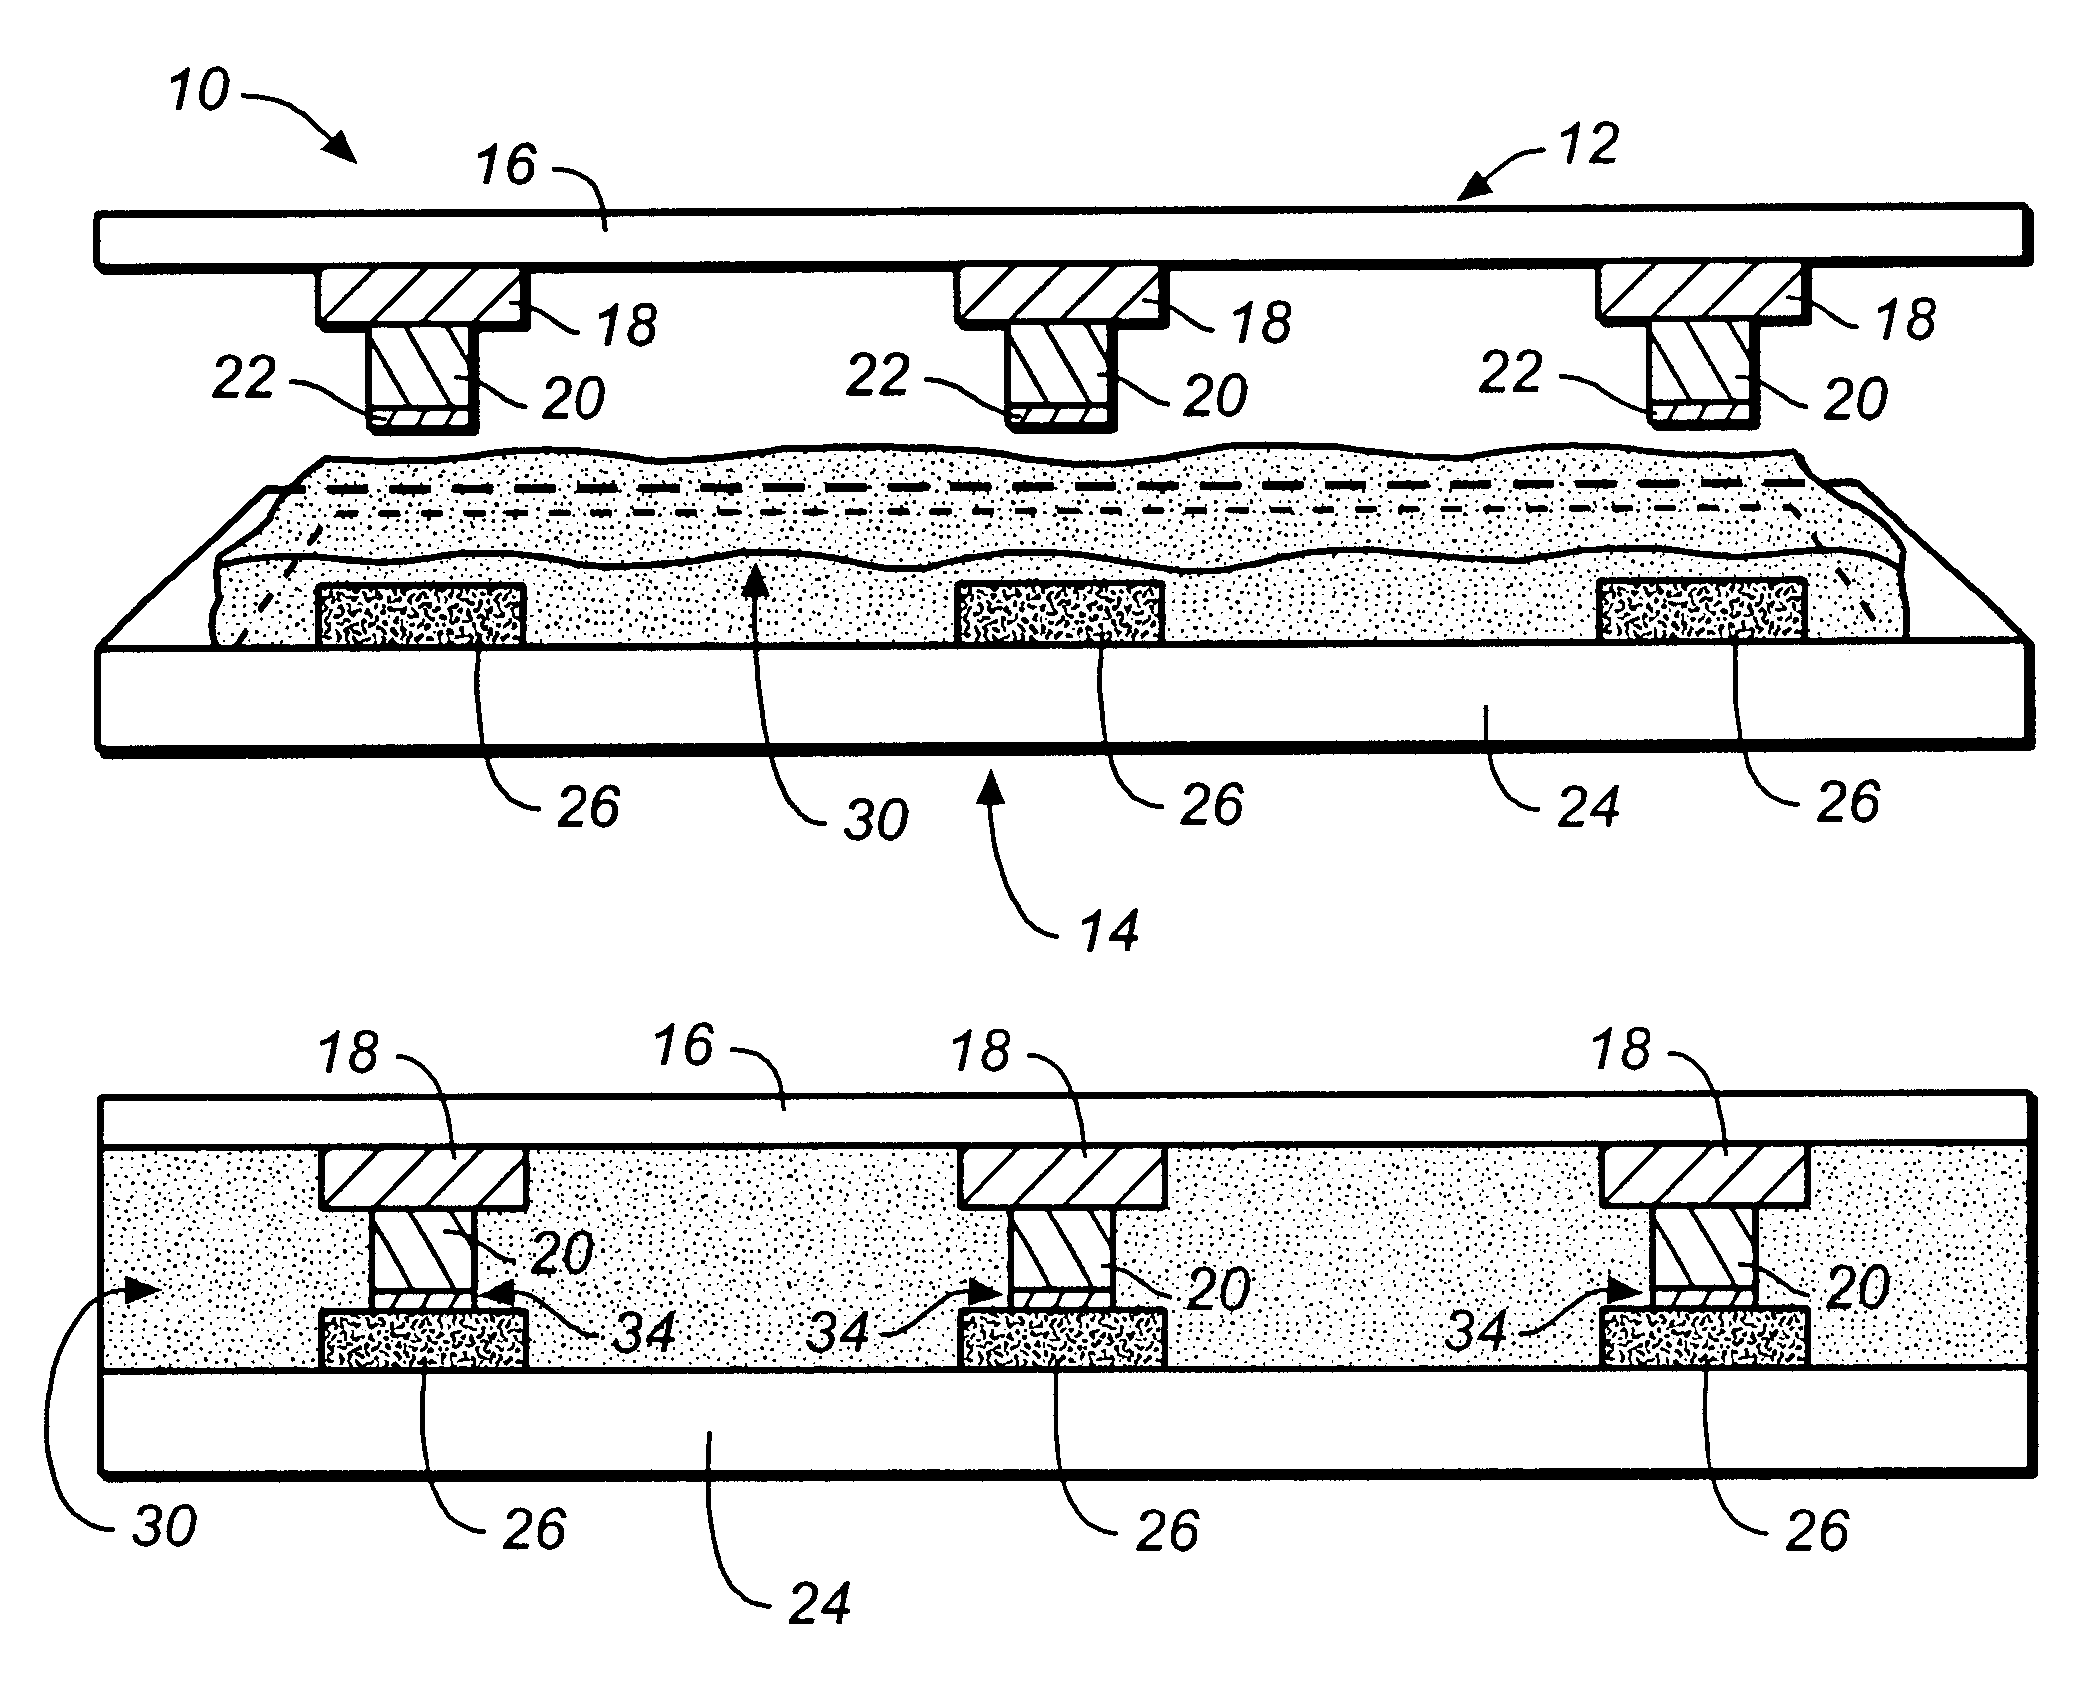 Interconnect assembly and Z-connection method for fine pitch substrates